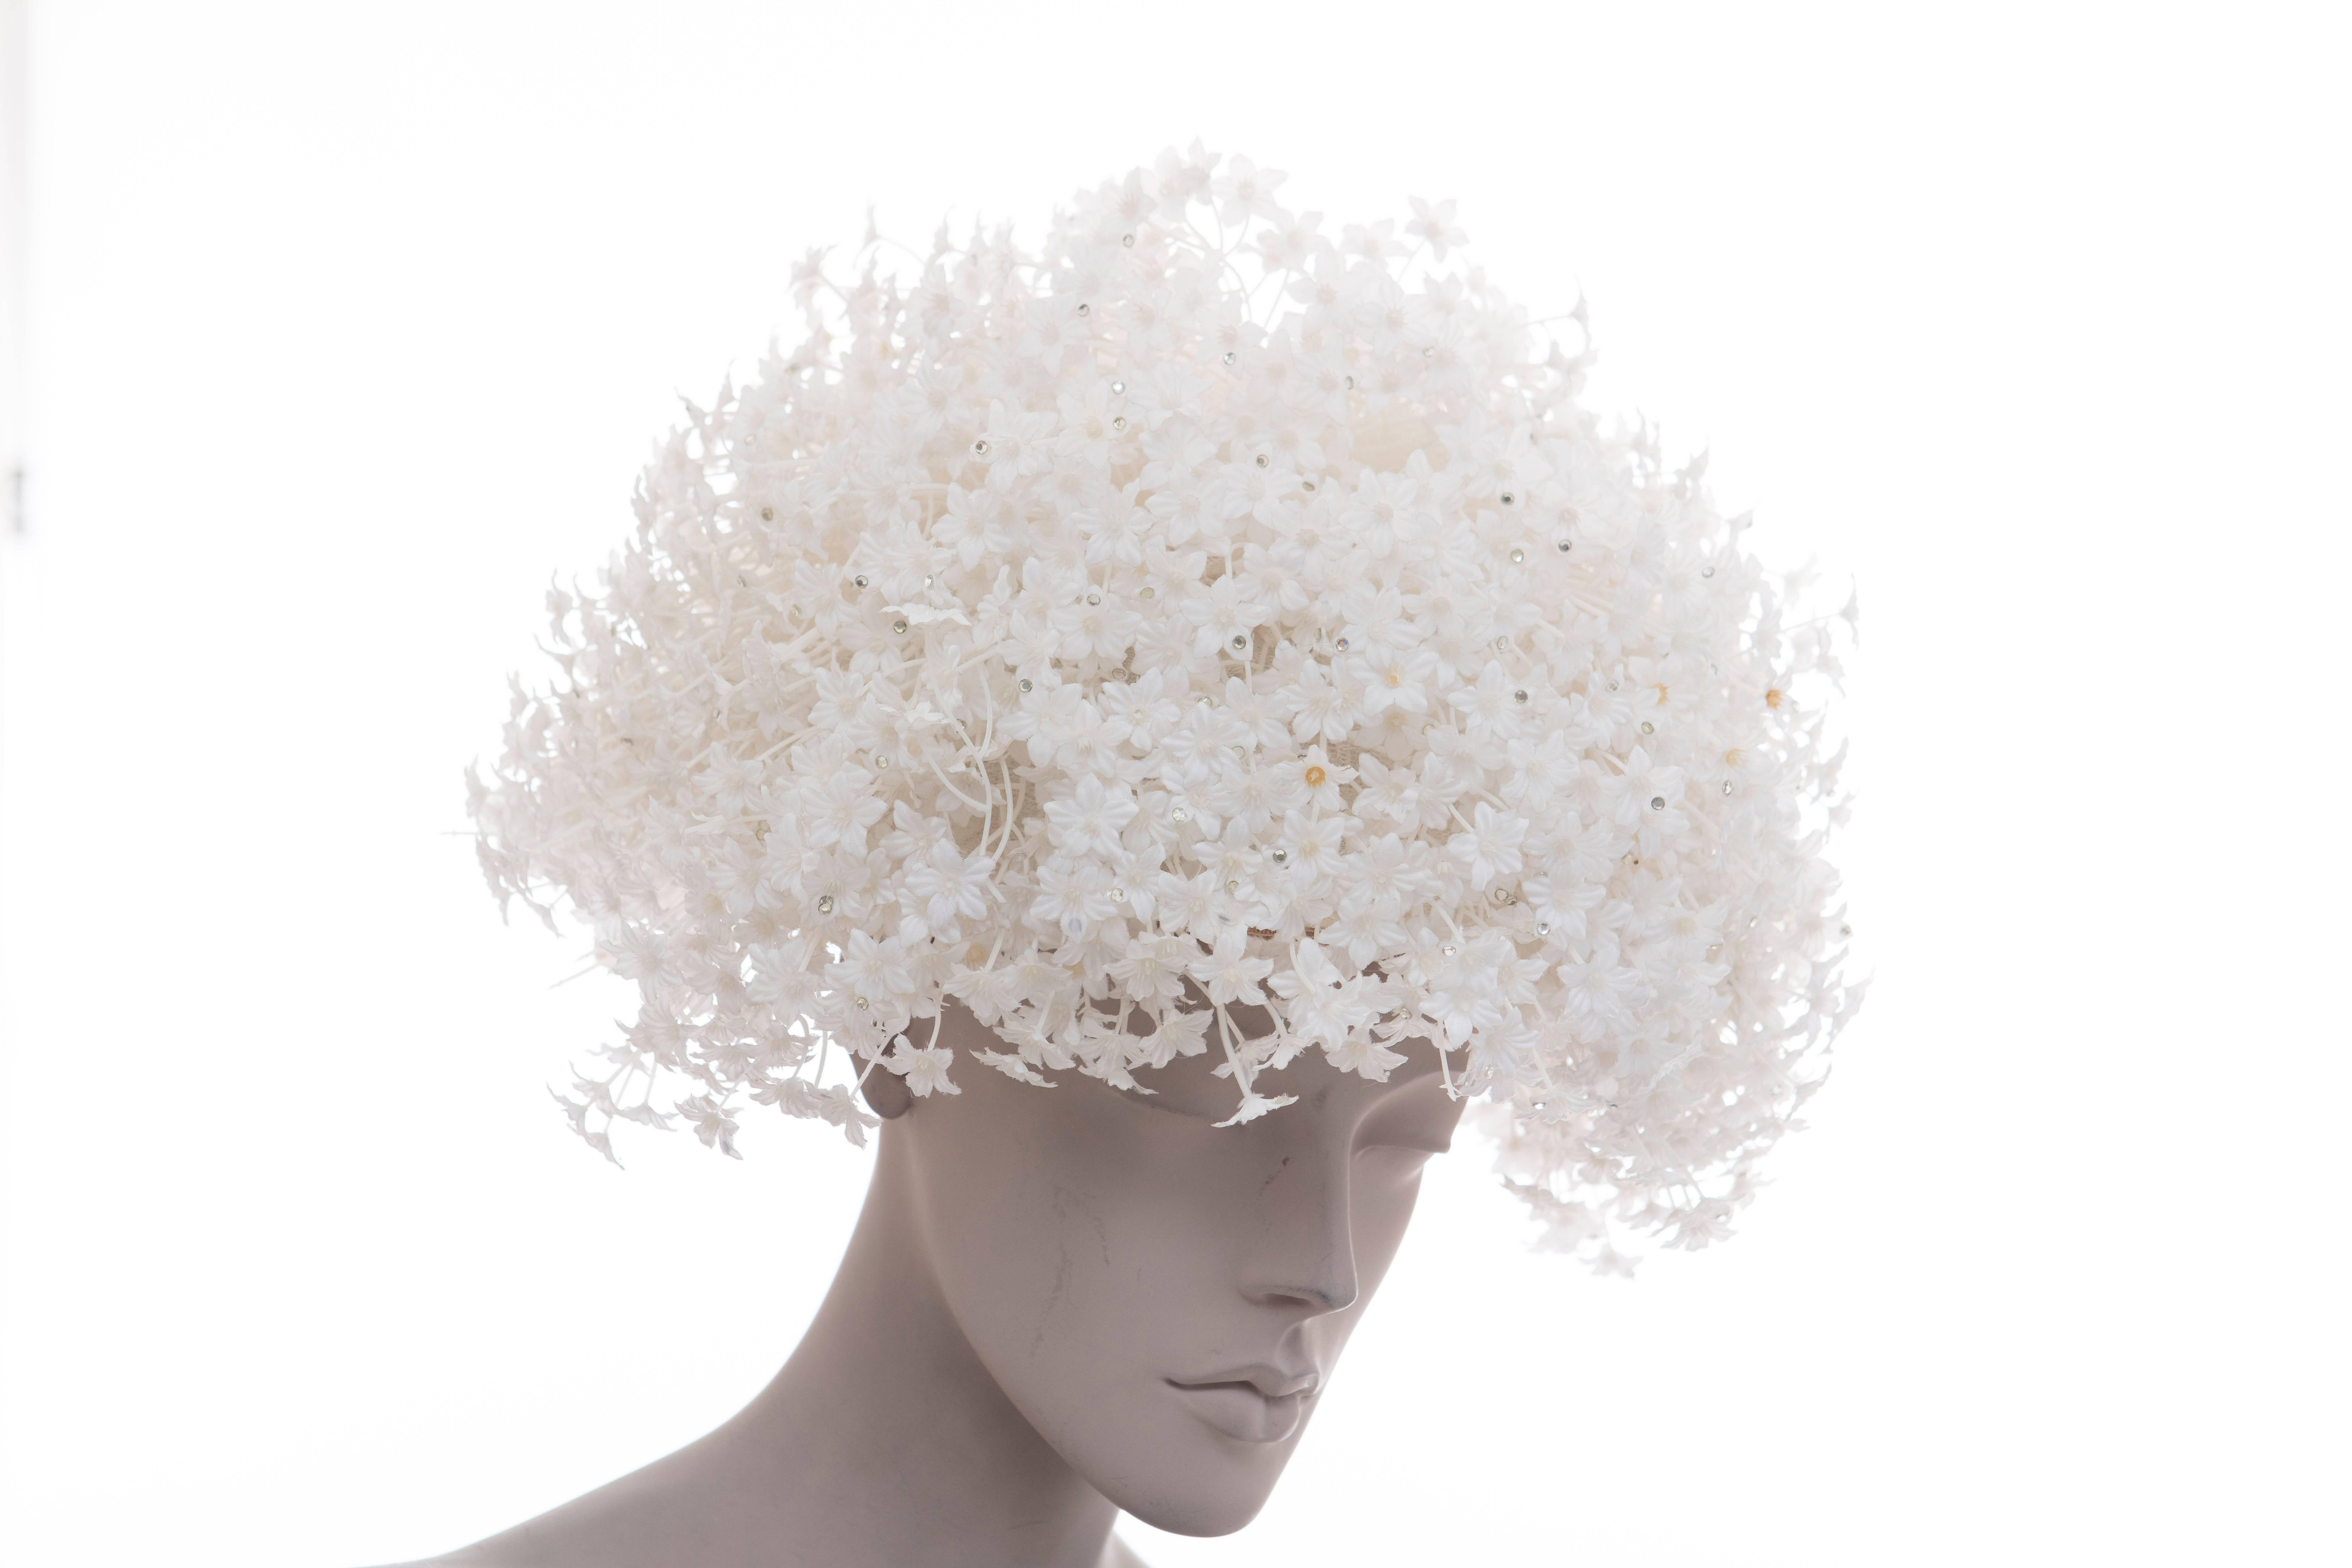 Jack McConnell White Mesh Hat With Flowers And Crystals.

Circumference: 23 Inch